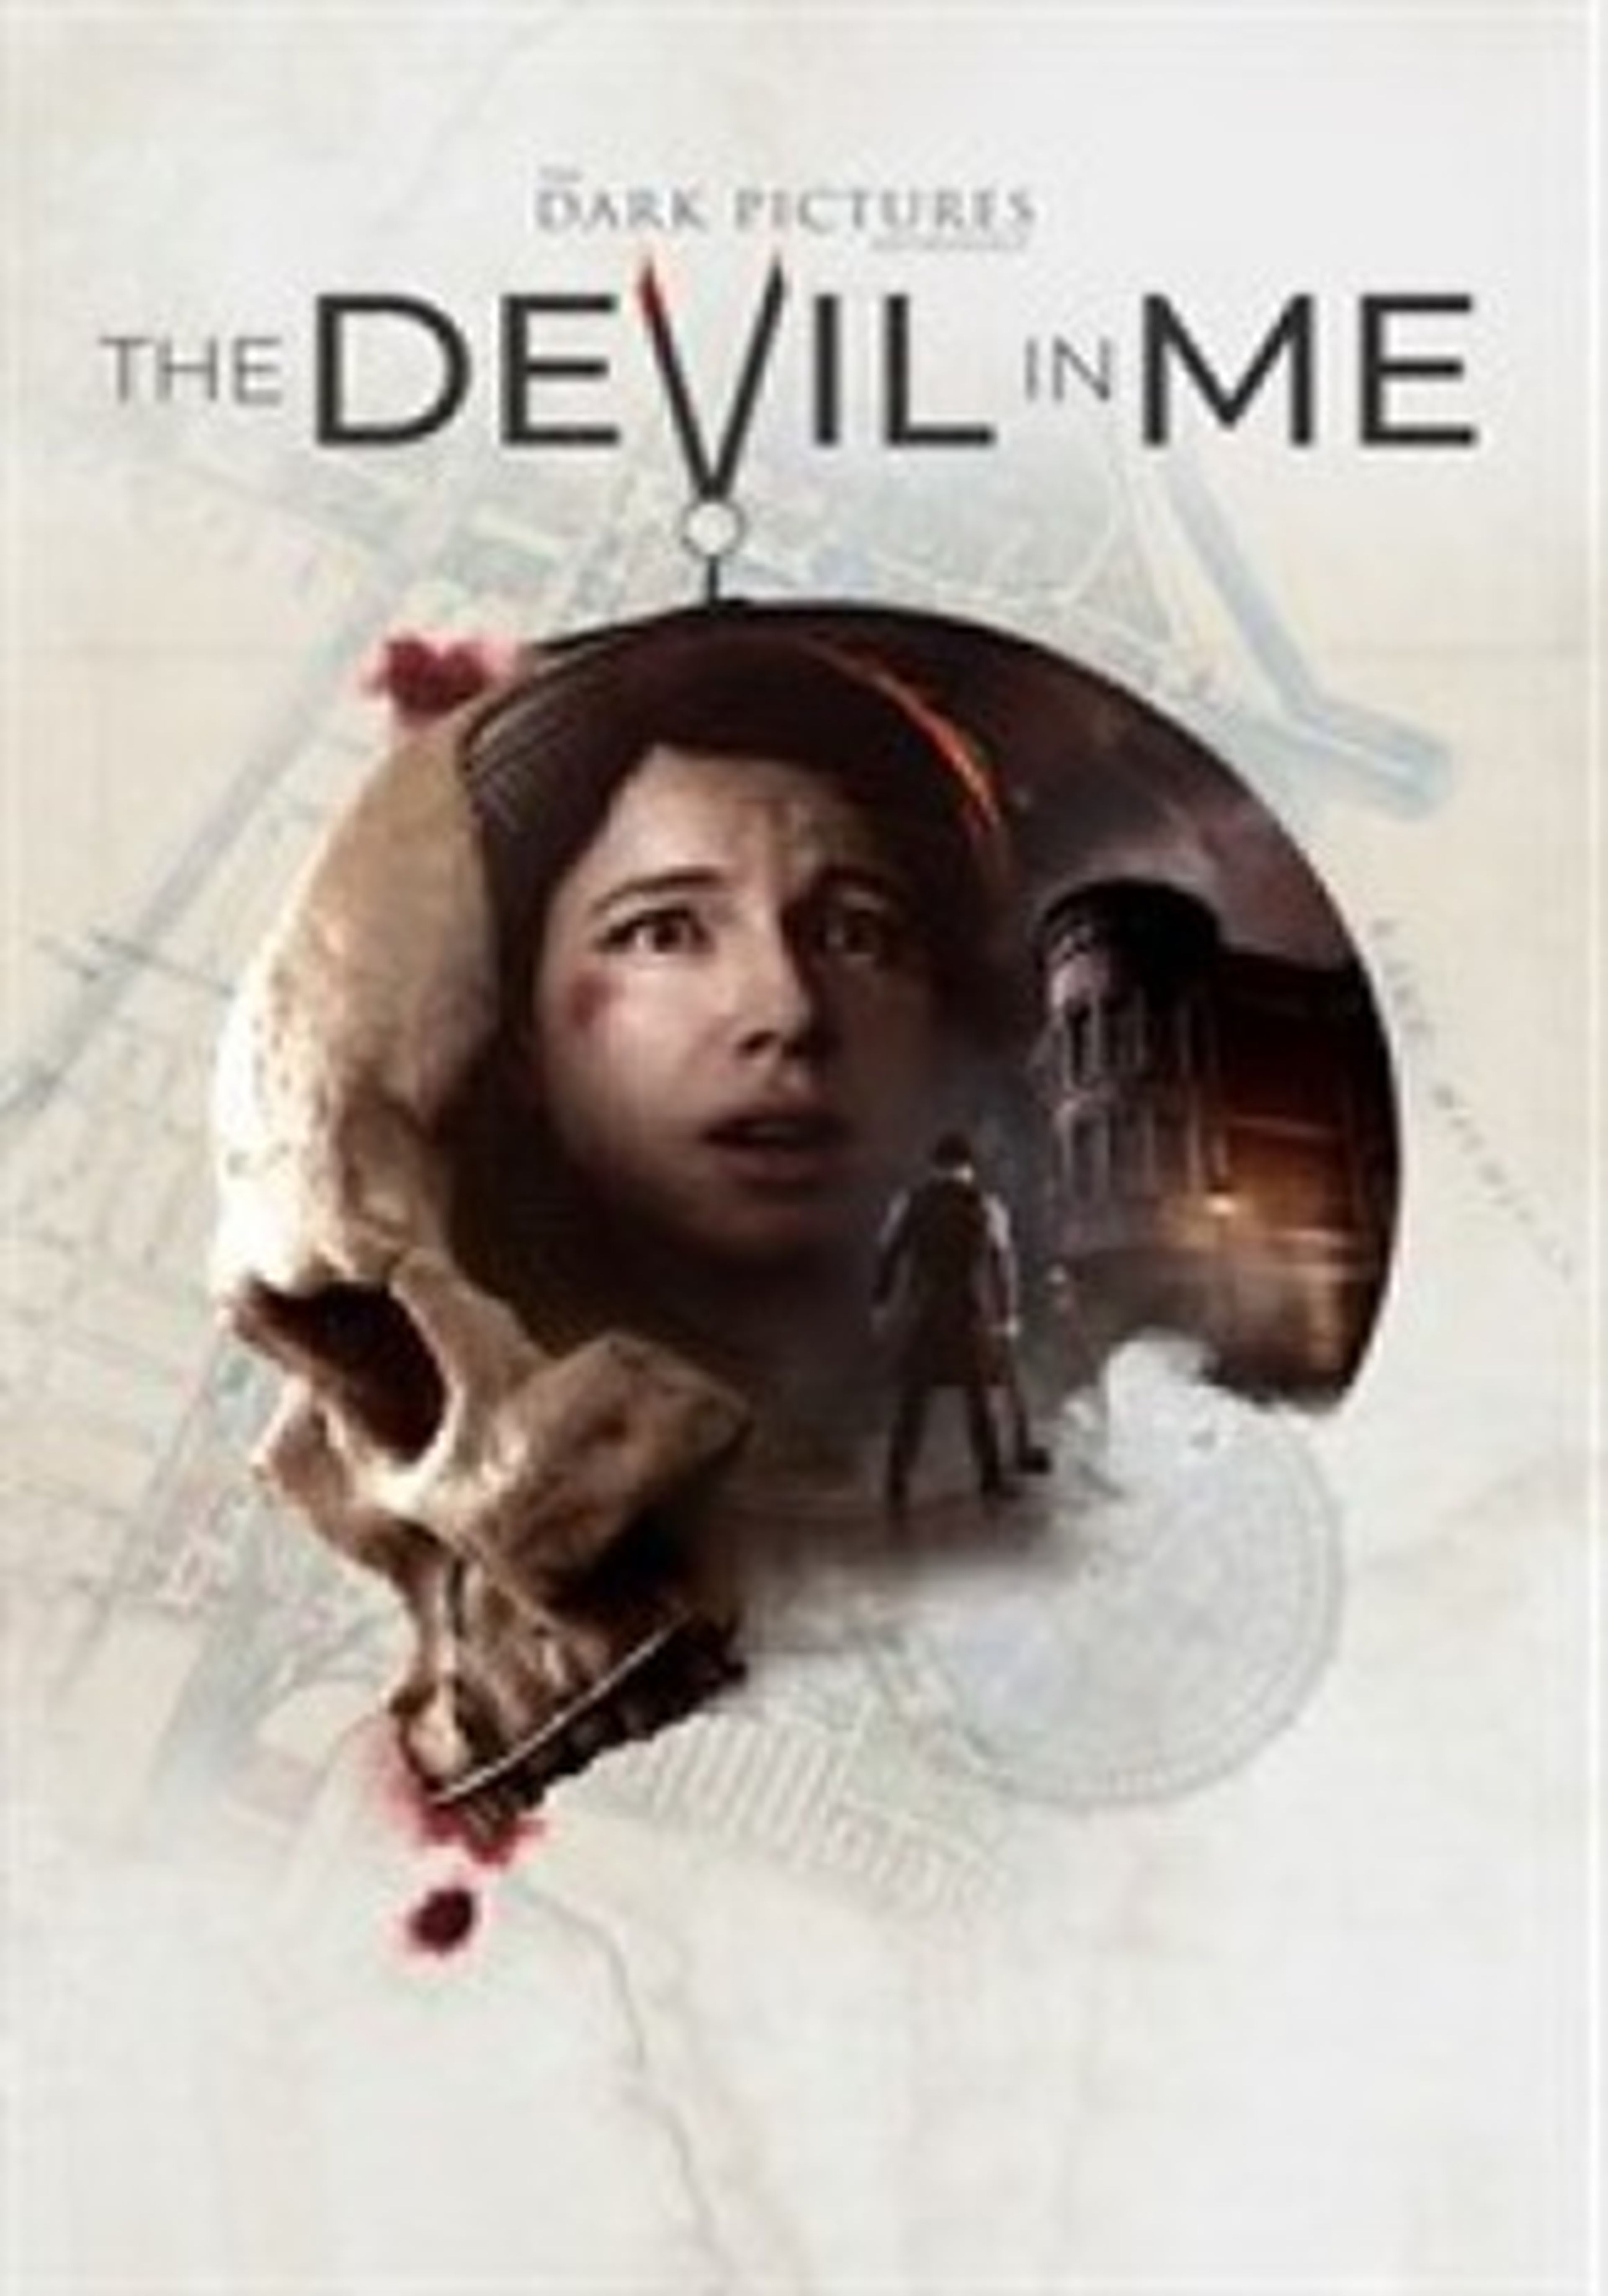 The Dark Pictures Anthology The Devil in Me cartel